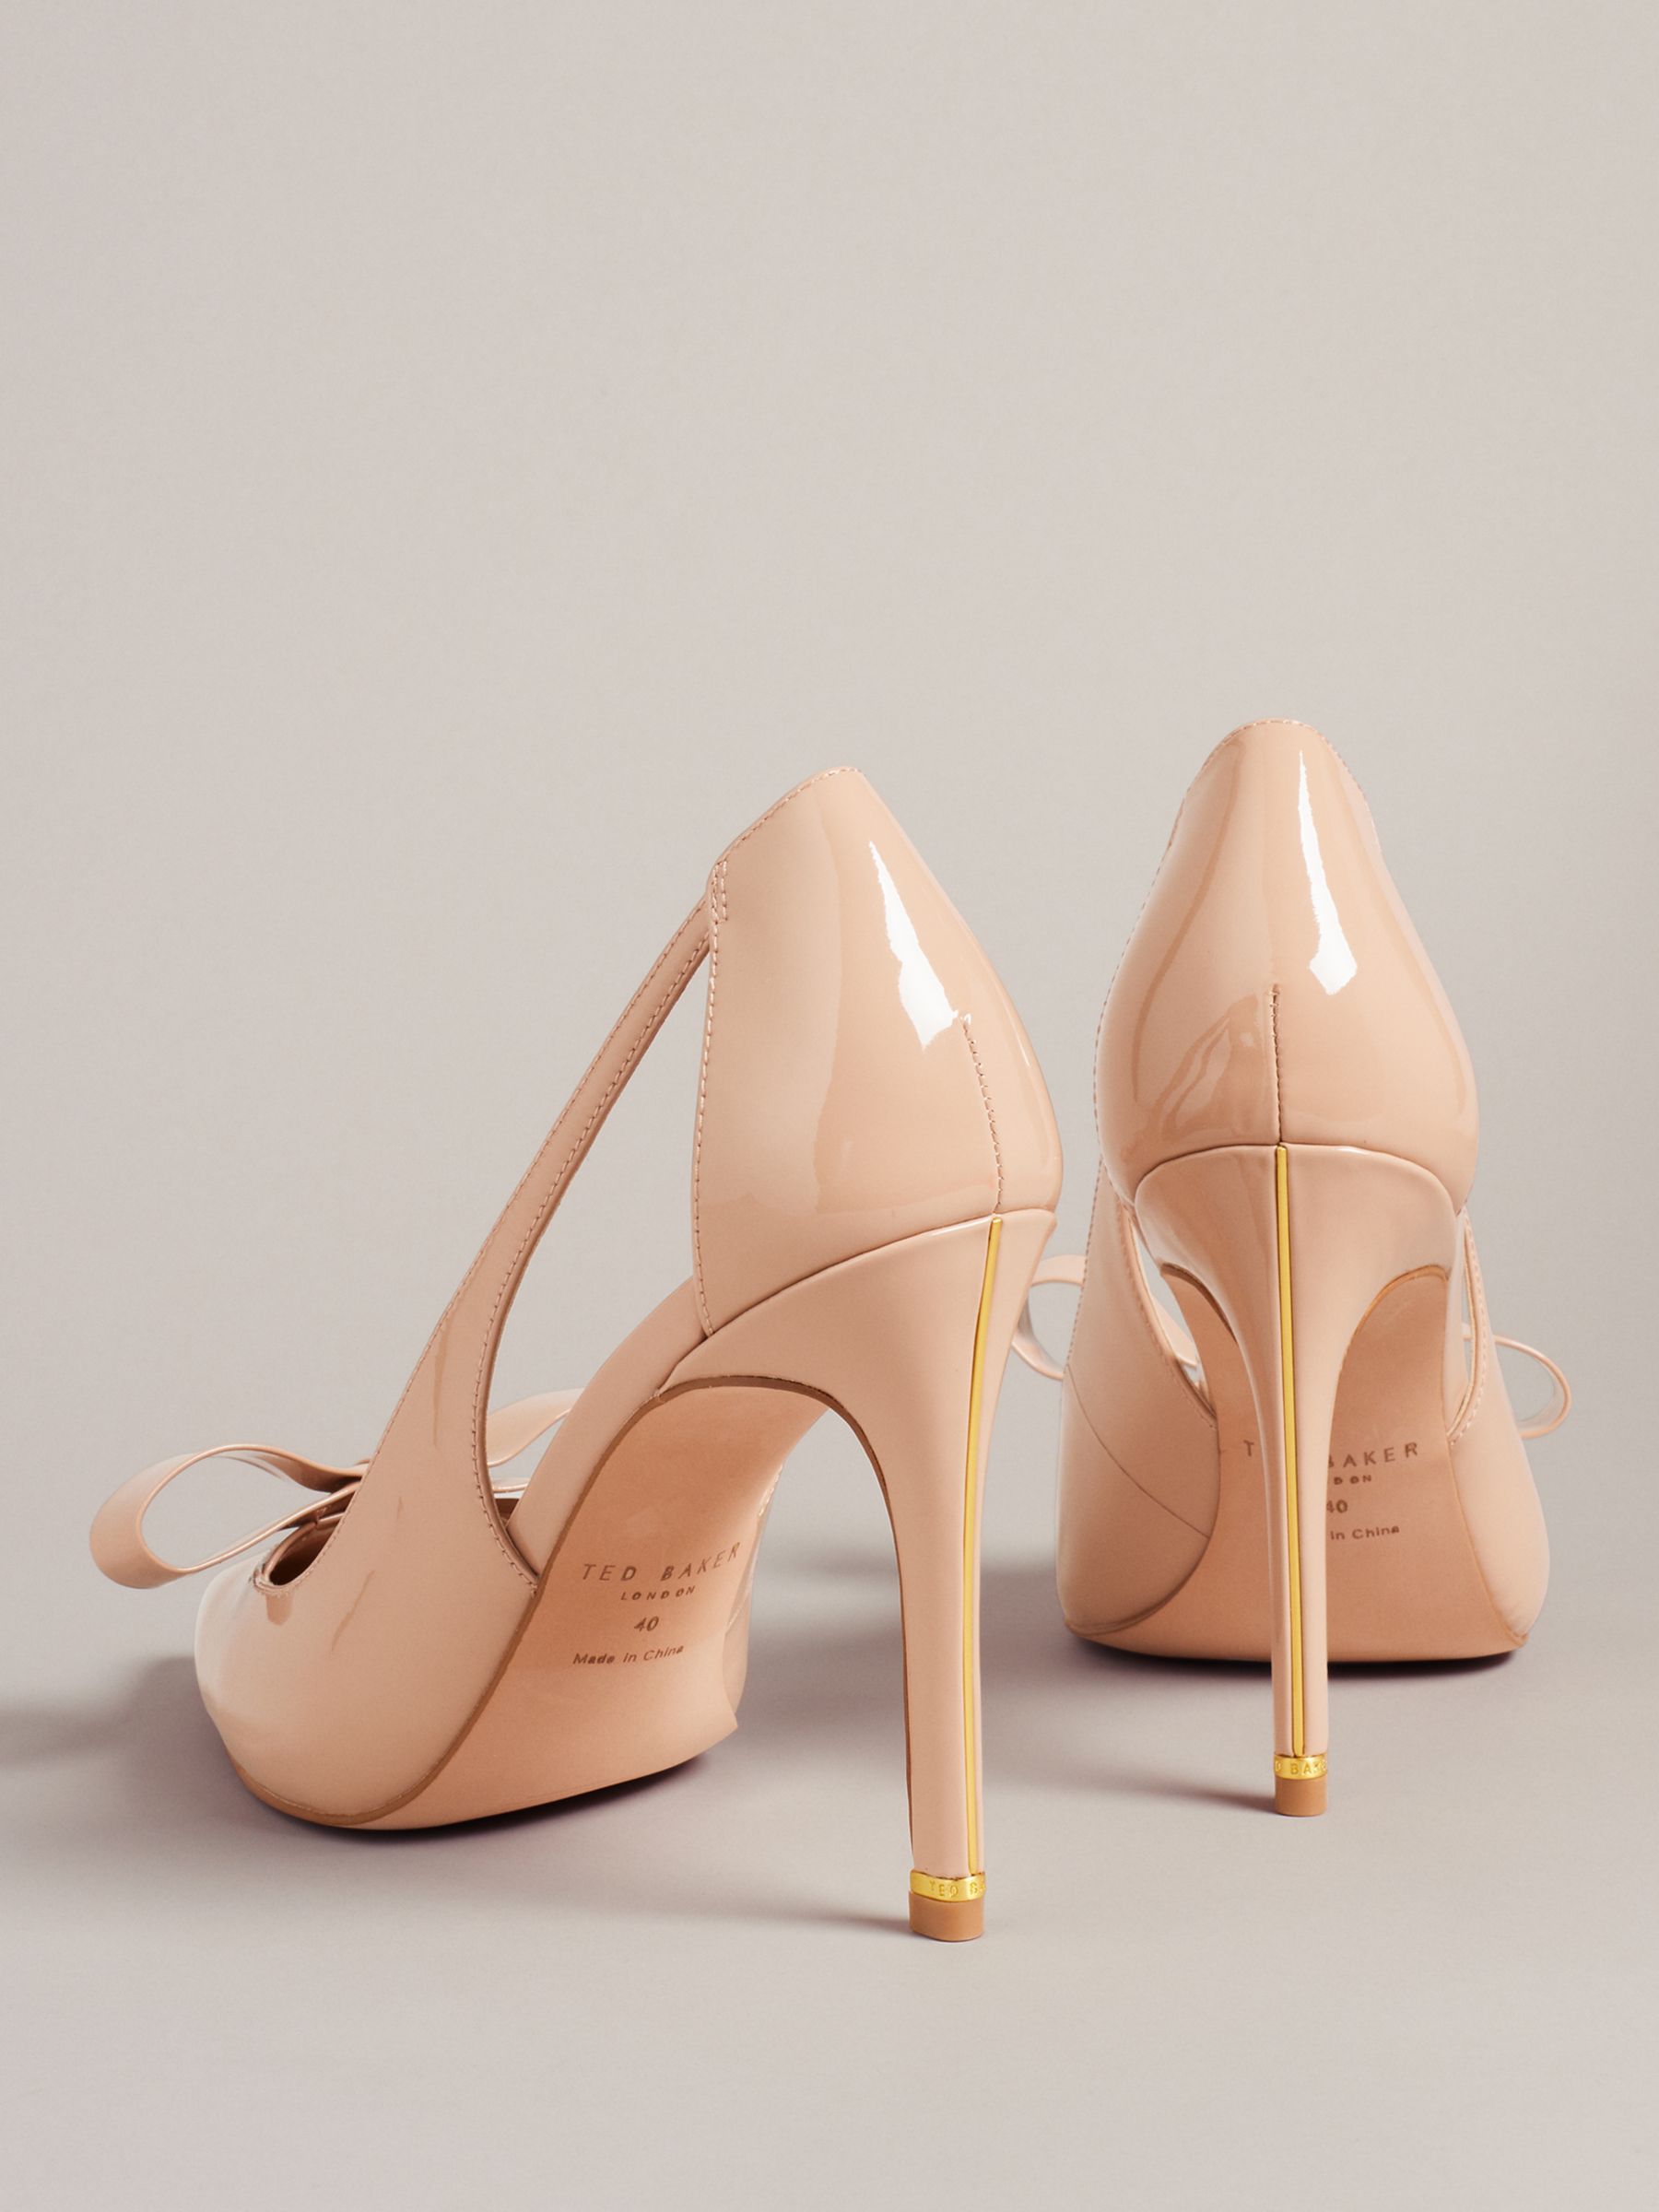 Ted Baker Orliney Patent Bow Cut Out Heeled Court Shoes, Nude, EU39